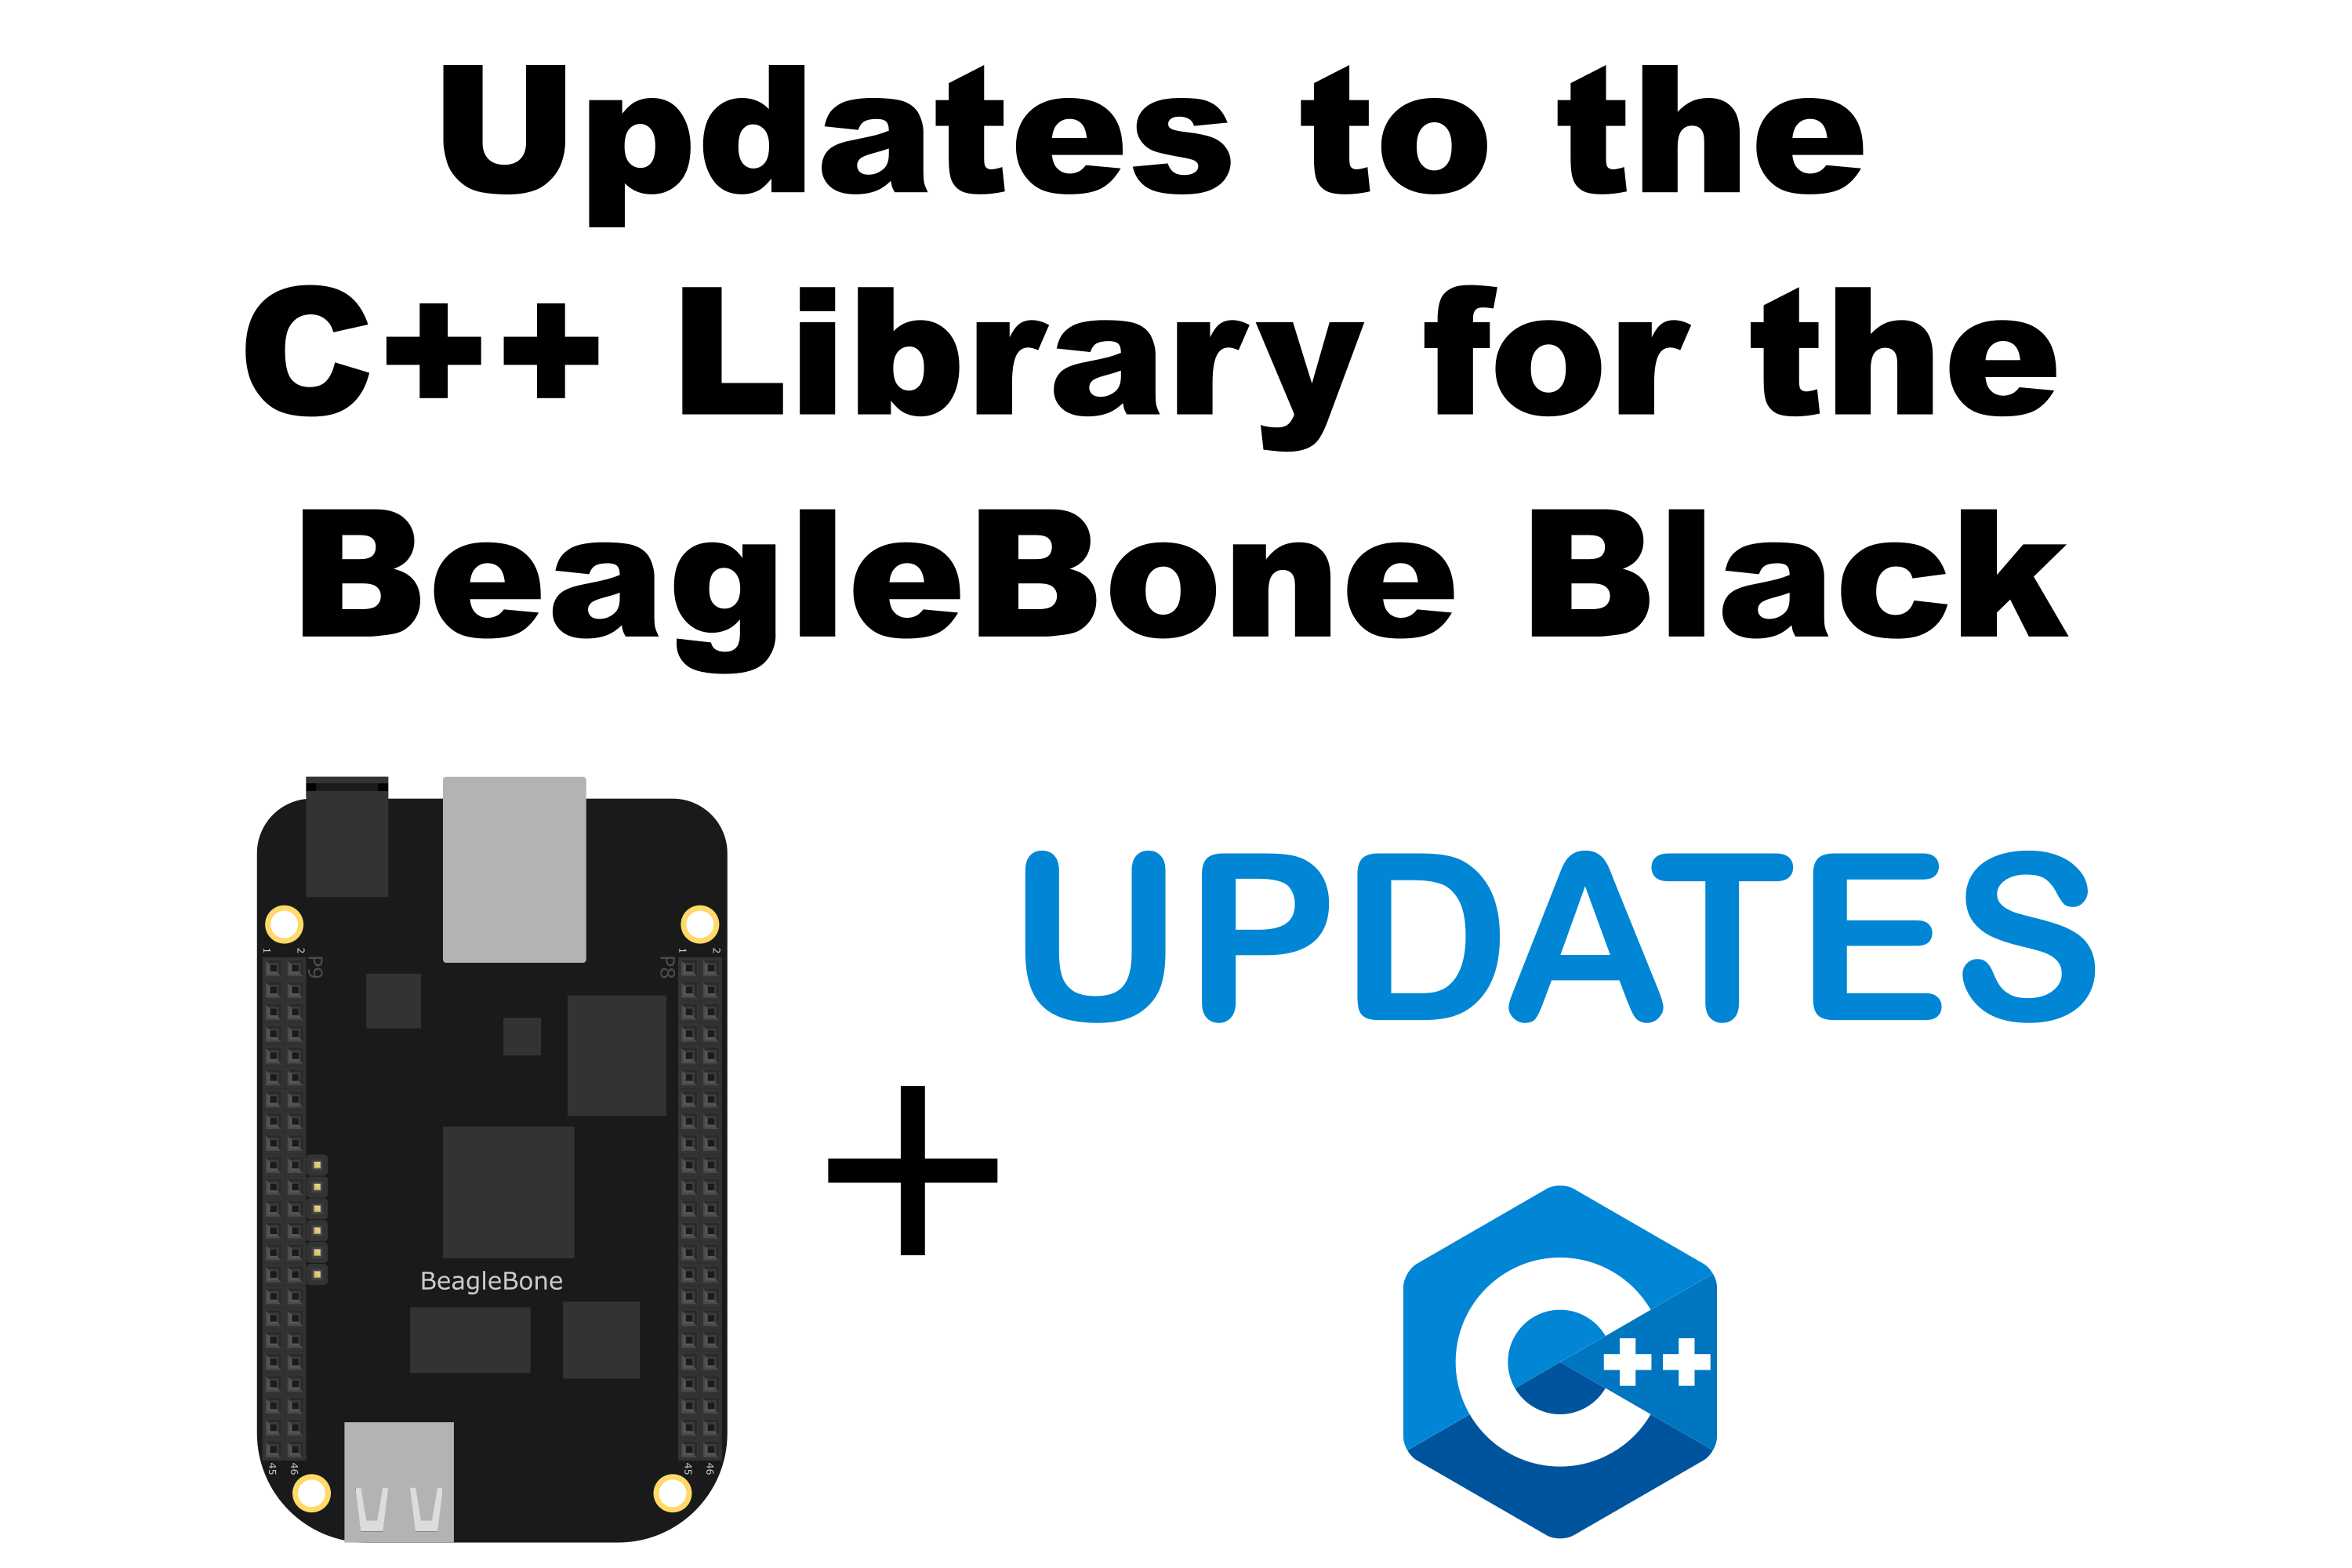 Updates to the C++ library for the BeagleBone Black